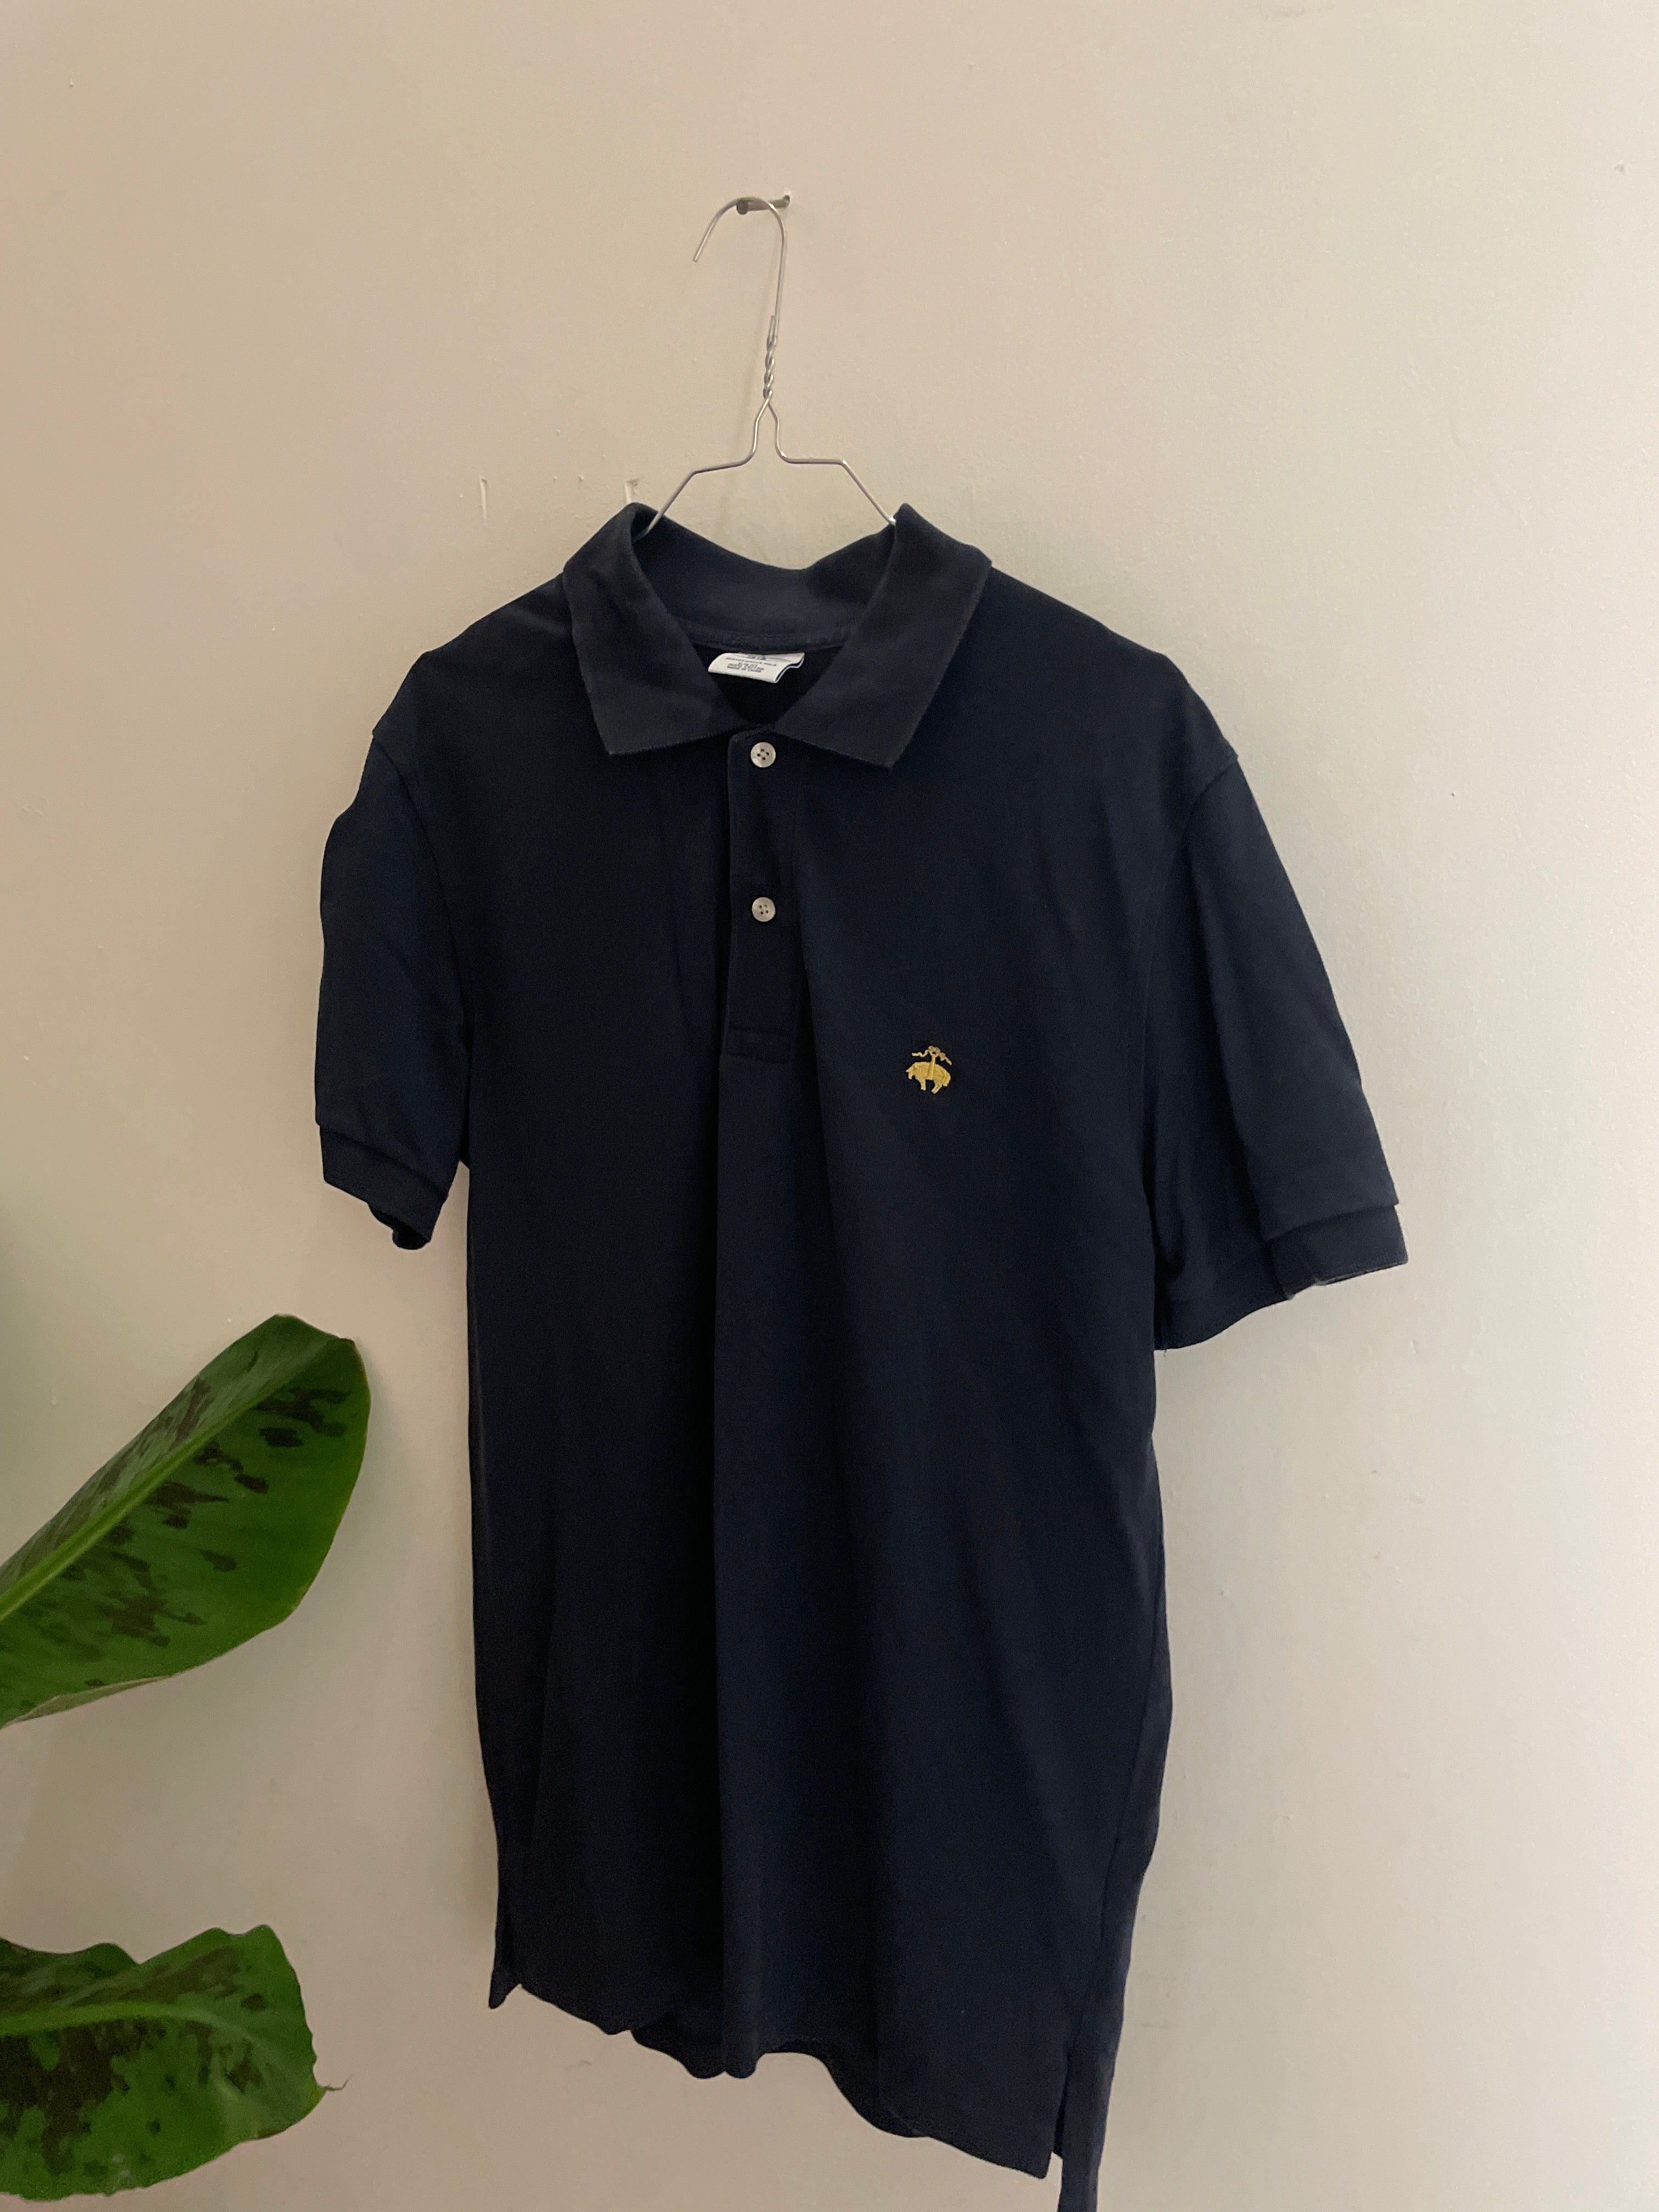 Vintage sacoor brothers blue men polo shirt size M